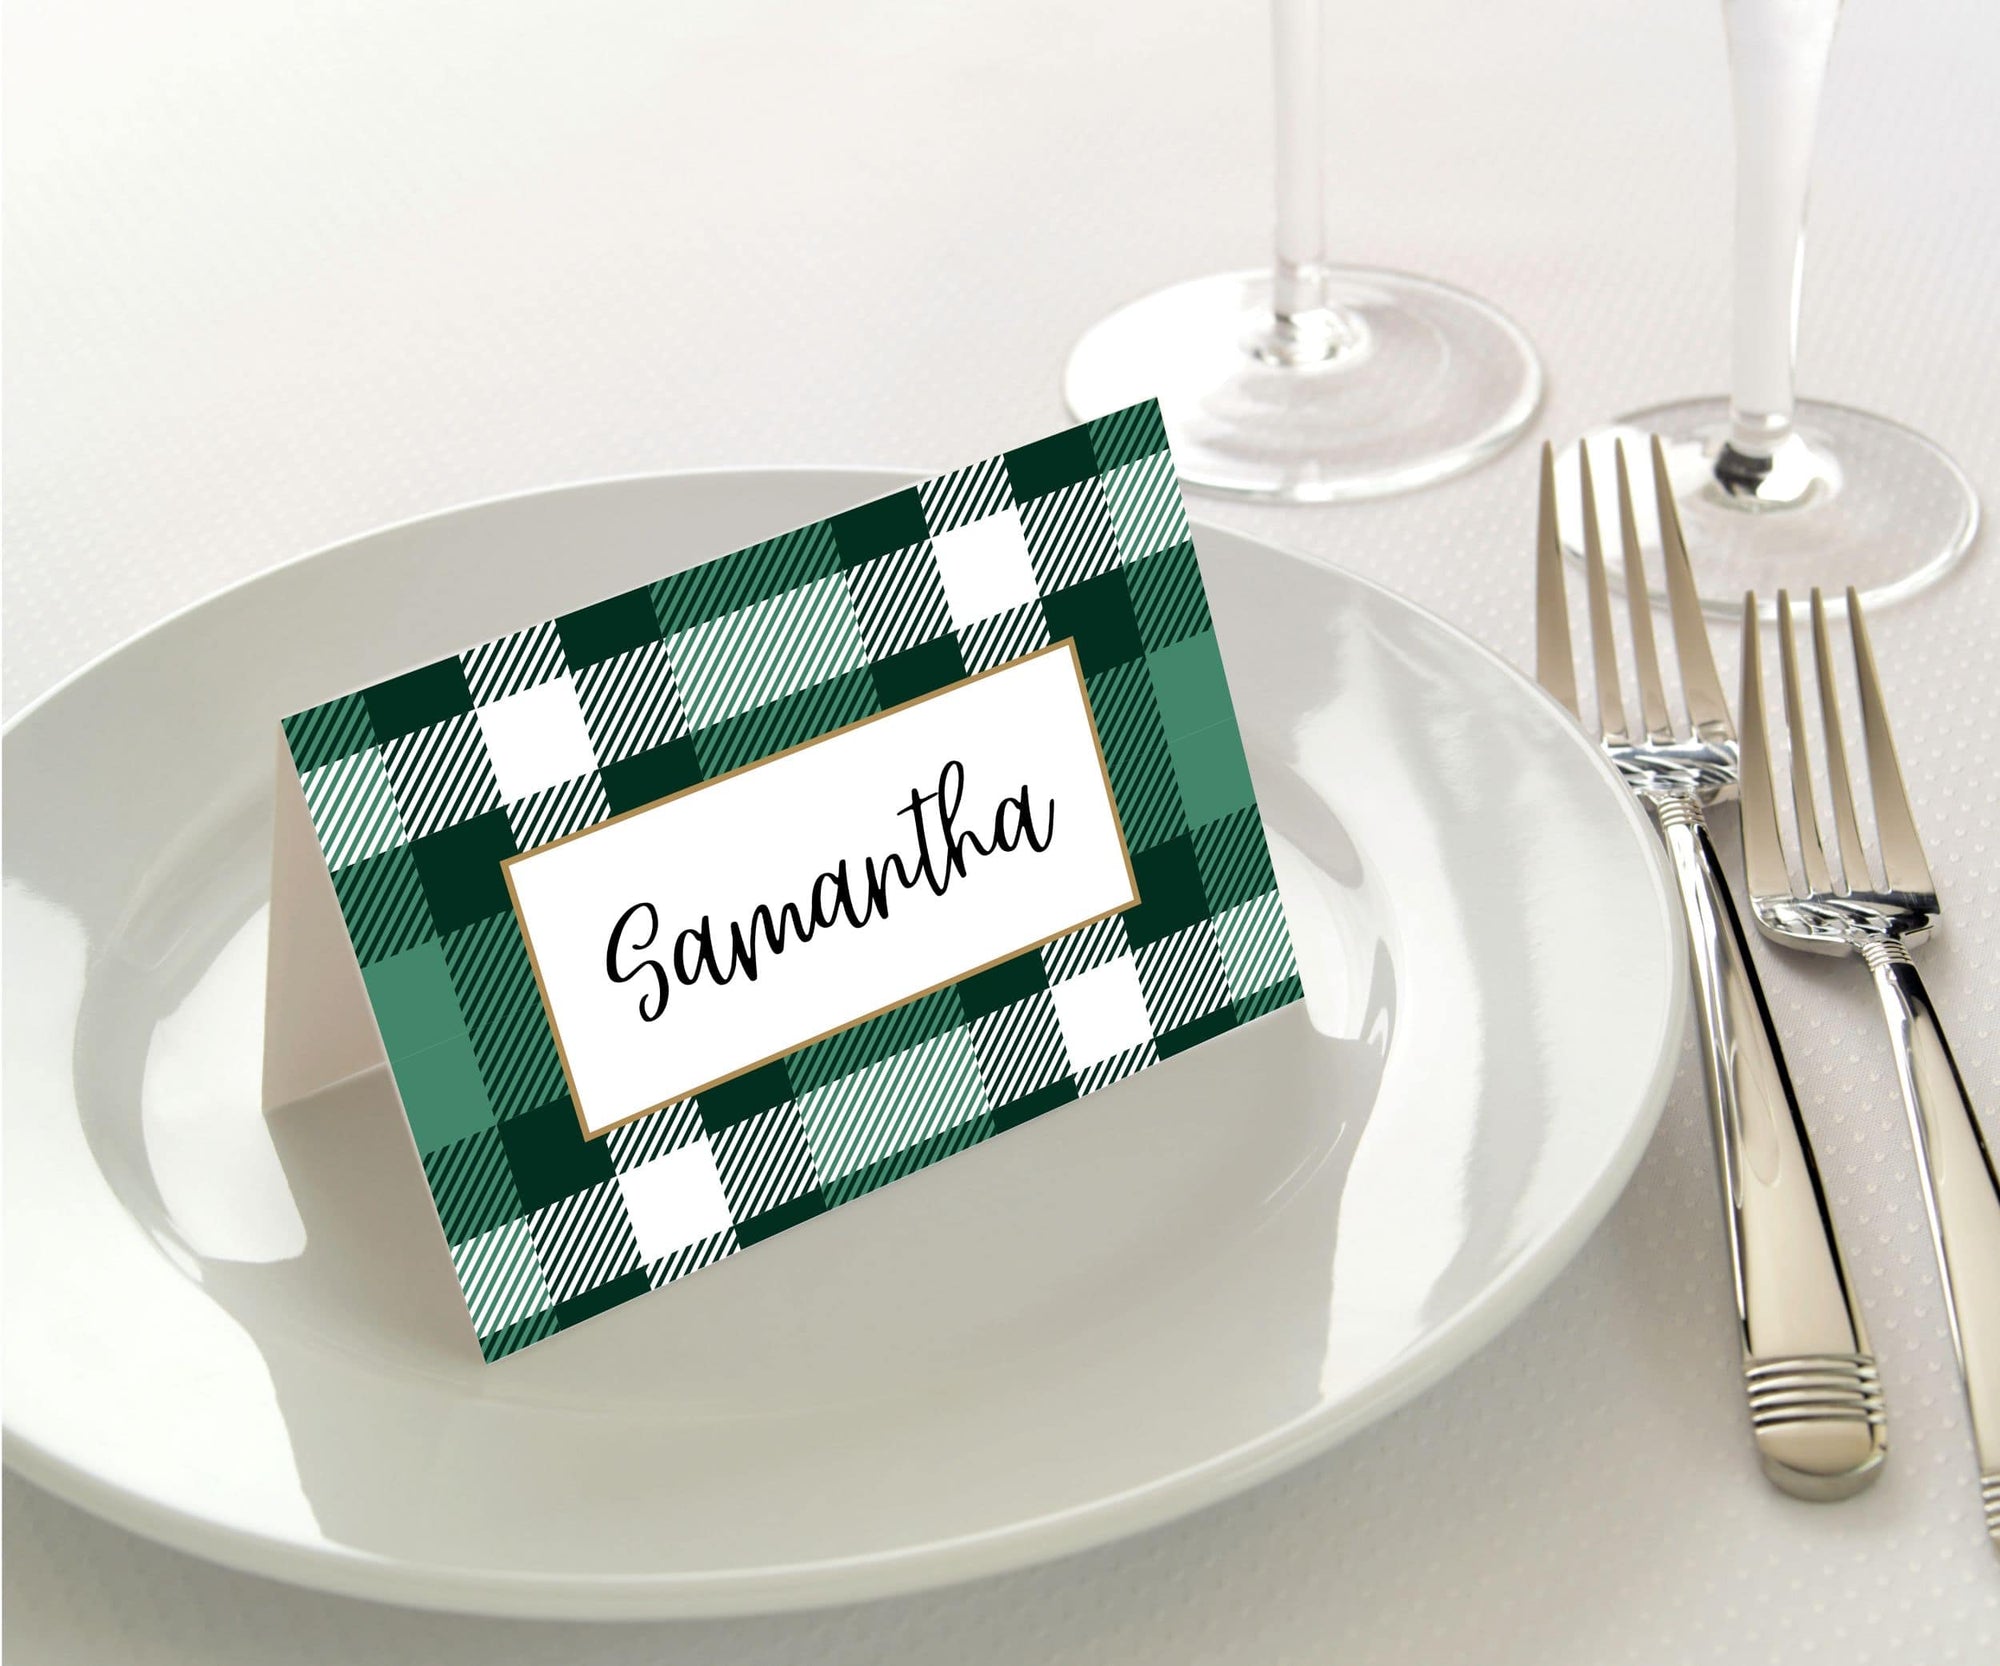 Manor Road Classic Green Plaid Place Cards 45Pk (Case of 2)